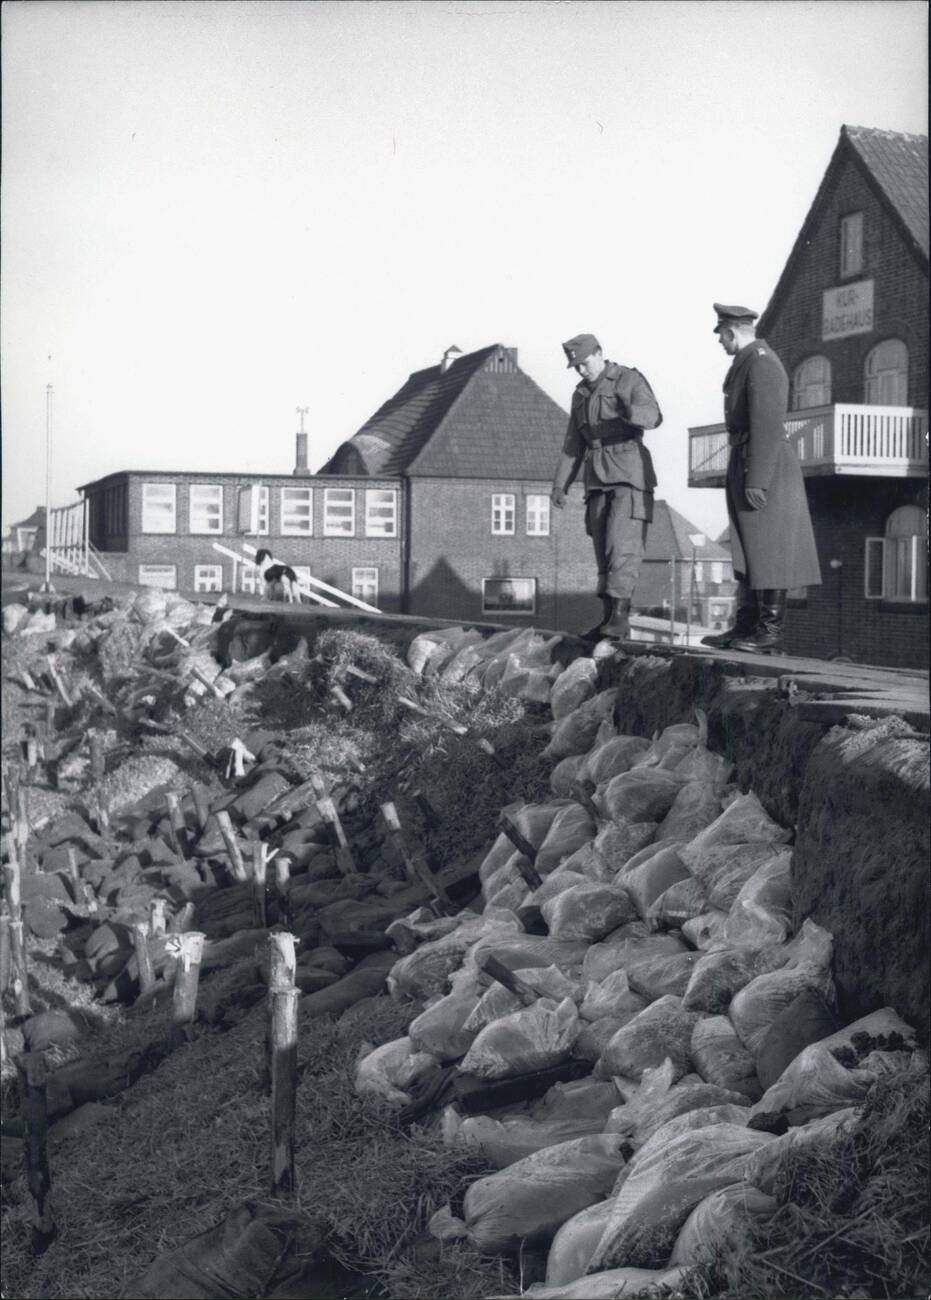 Heavily damaged dike in Busum, Germany after the North Sea Flood of 1962